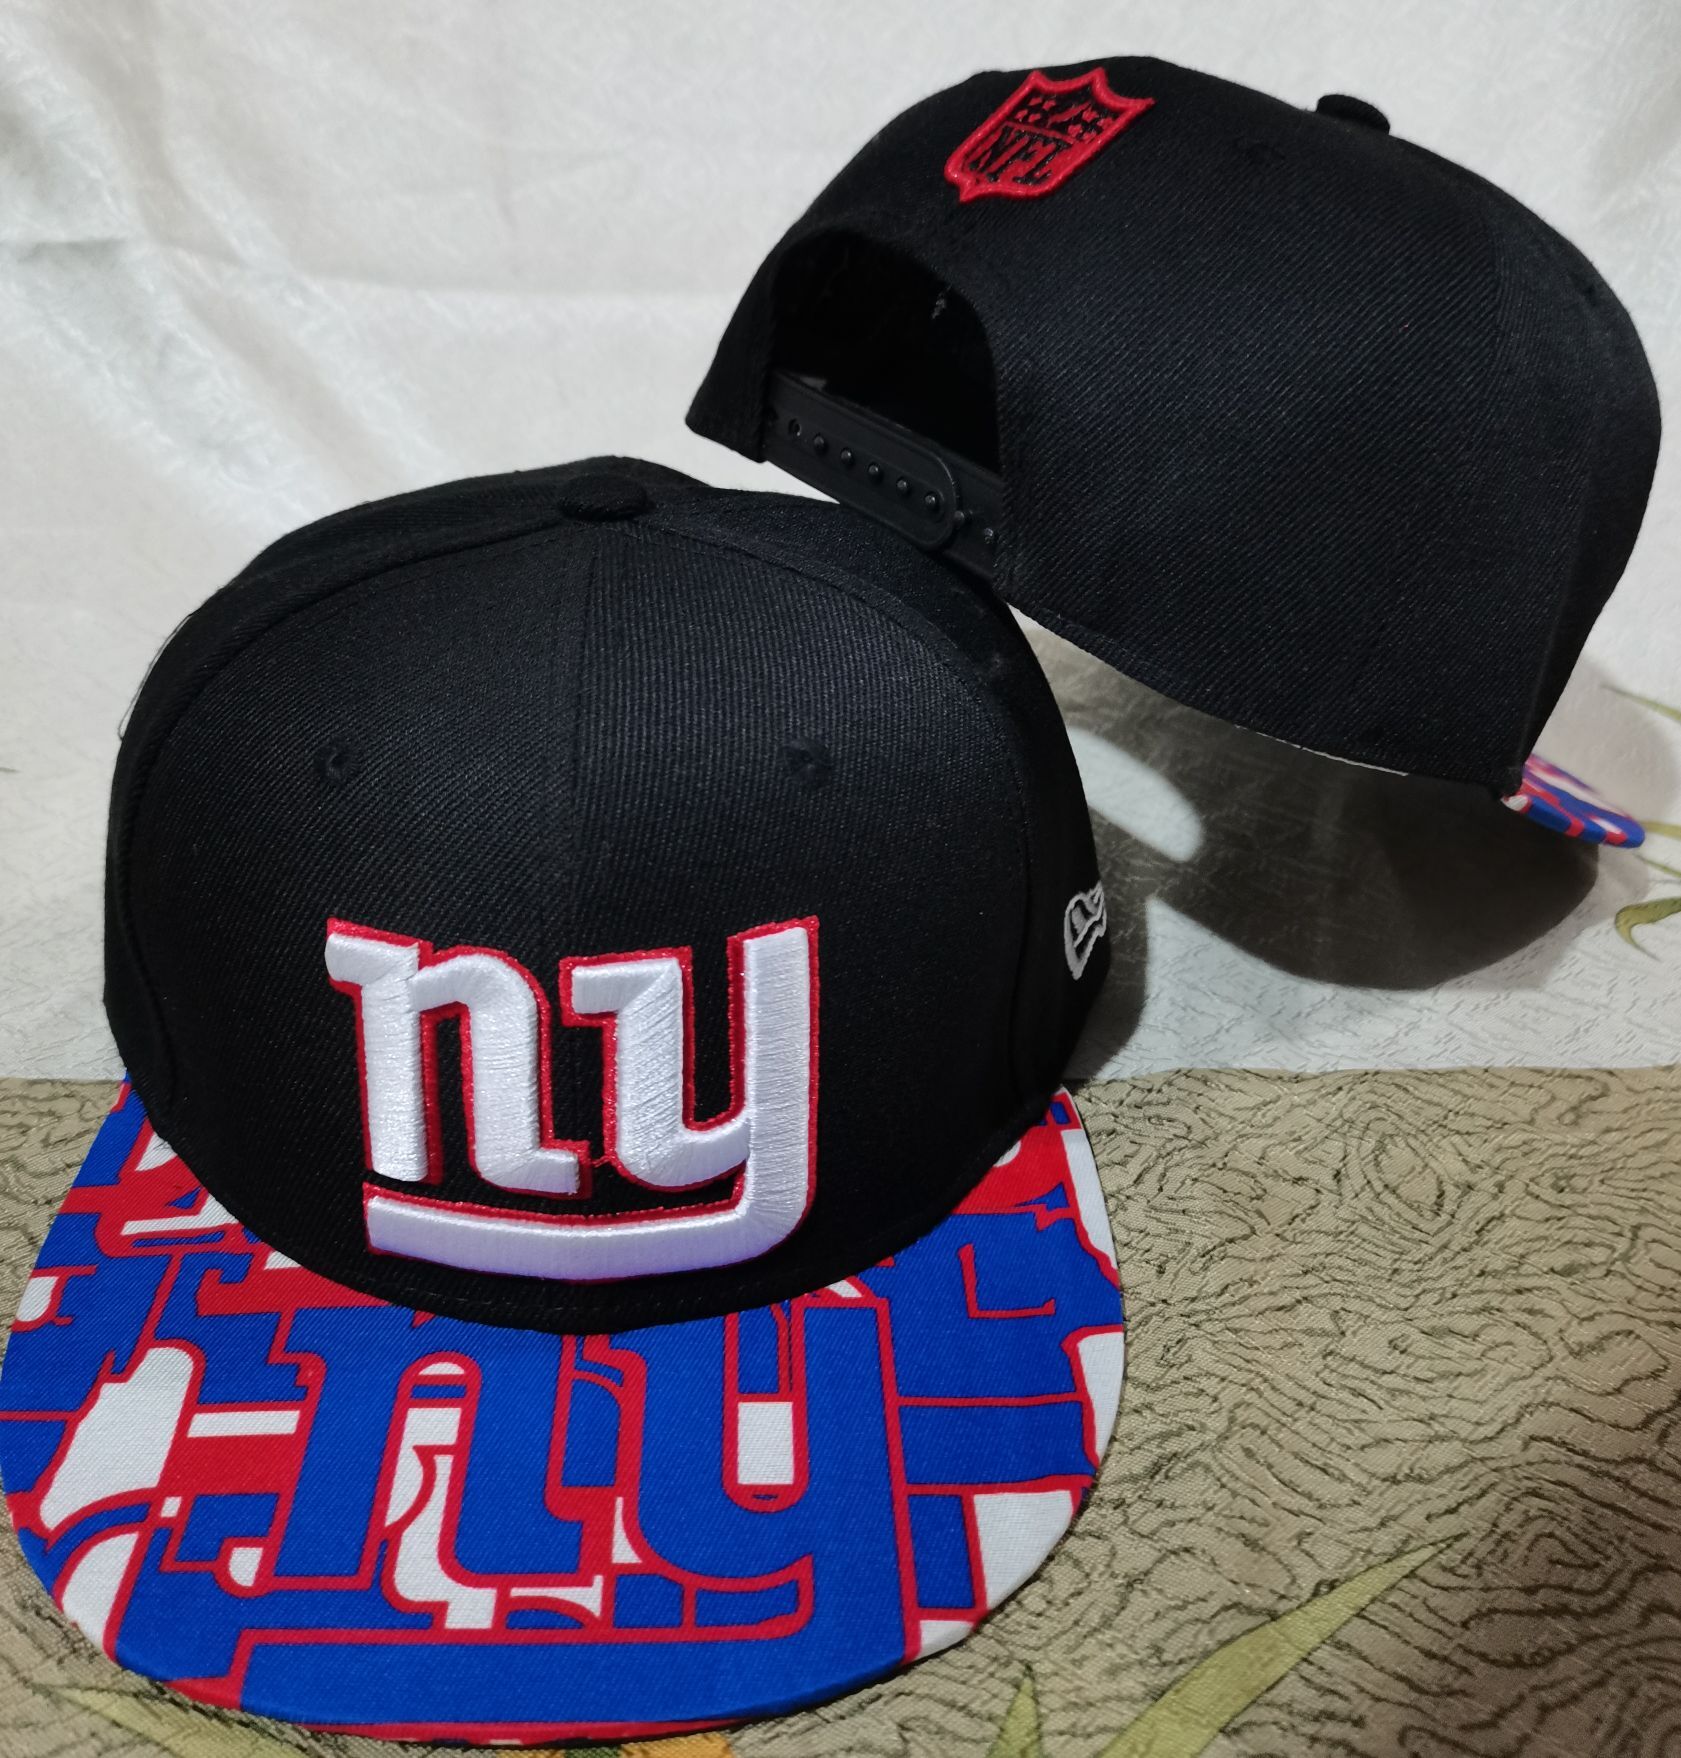 2022 NFL New York Giants hat GSMY->nfl hats->Sports Caps